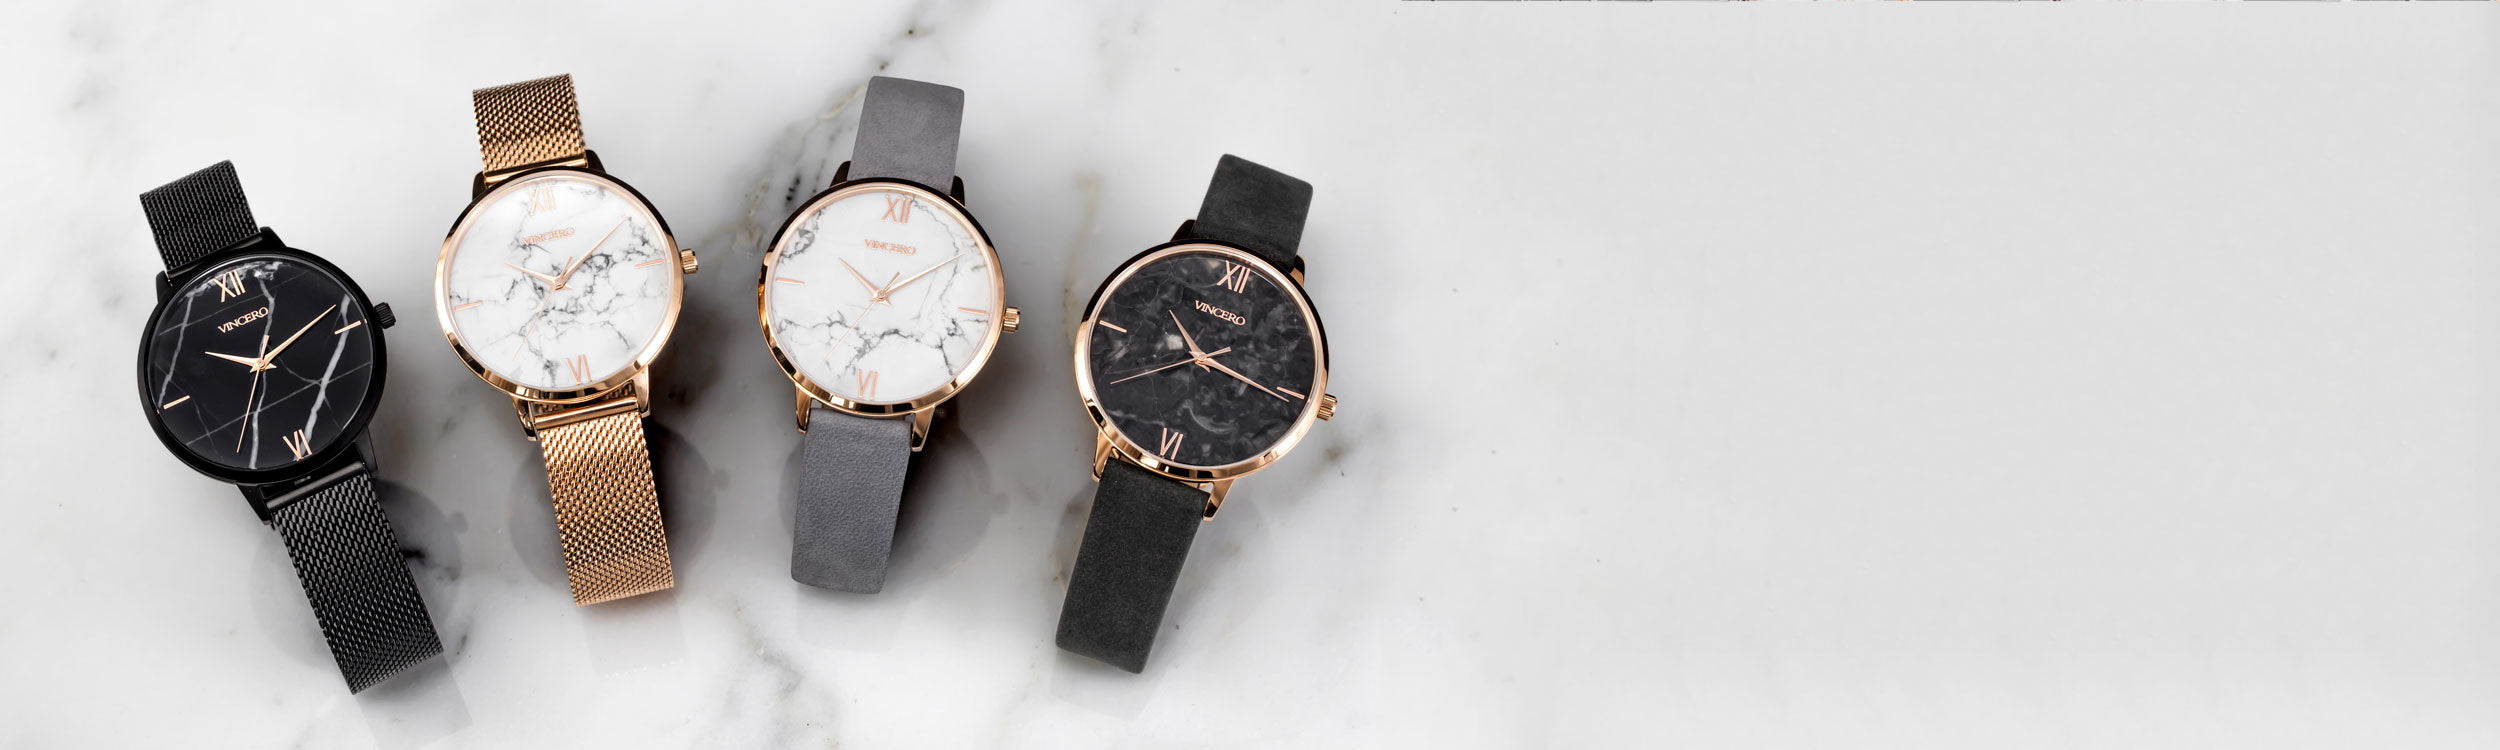 Four marble faced watches with mesh and leather straps laying in white marble